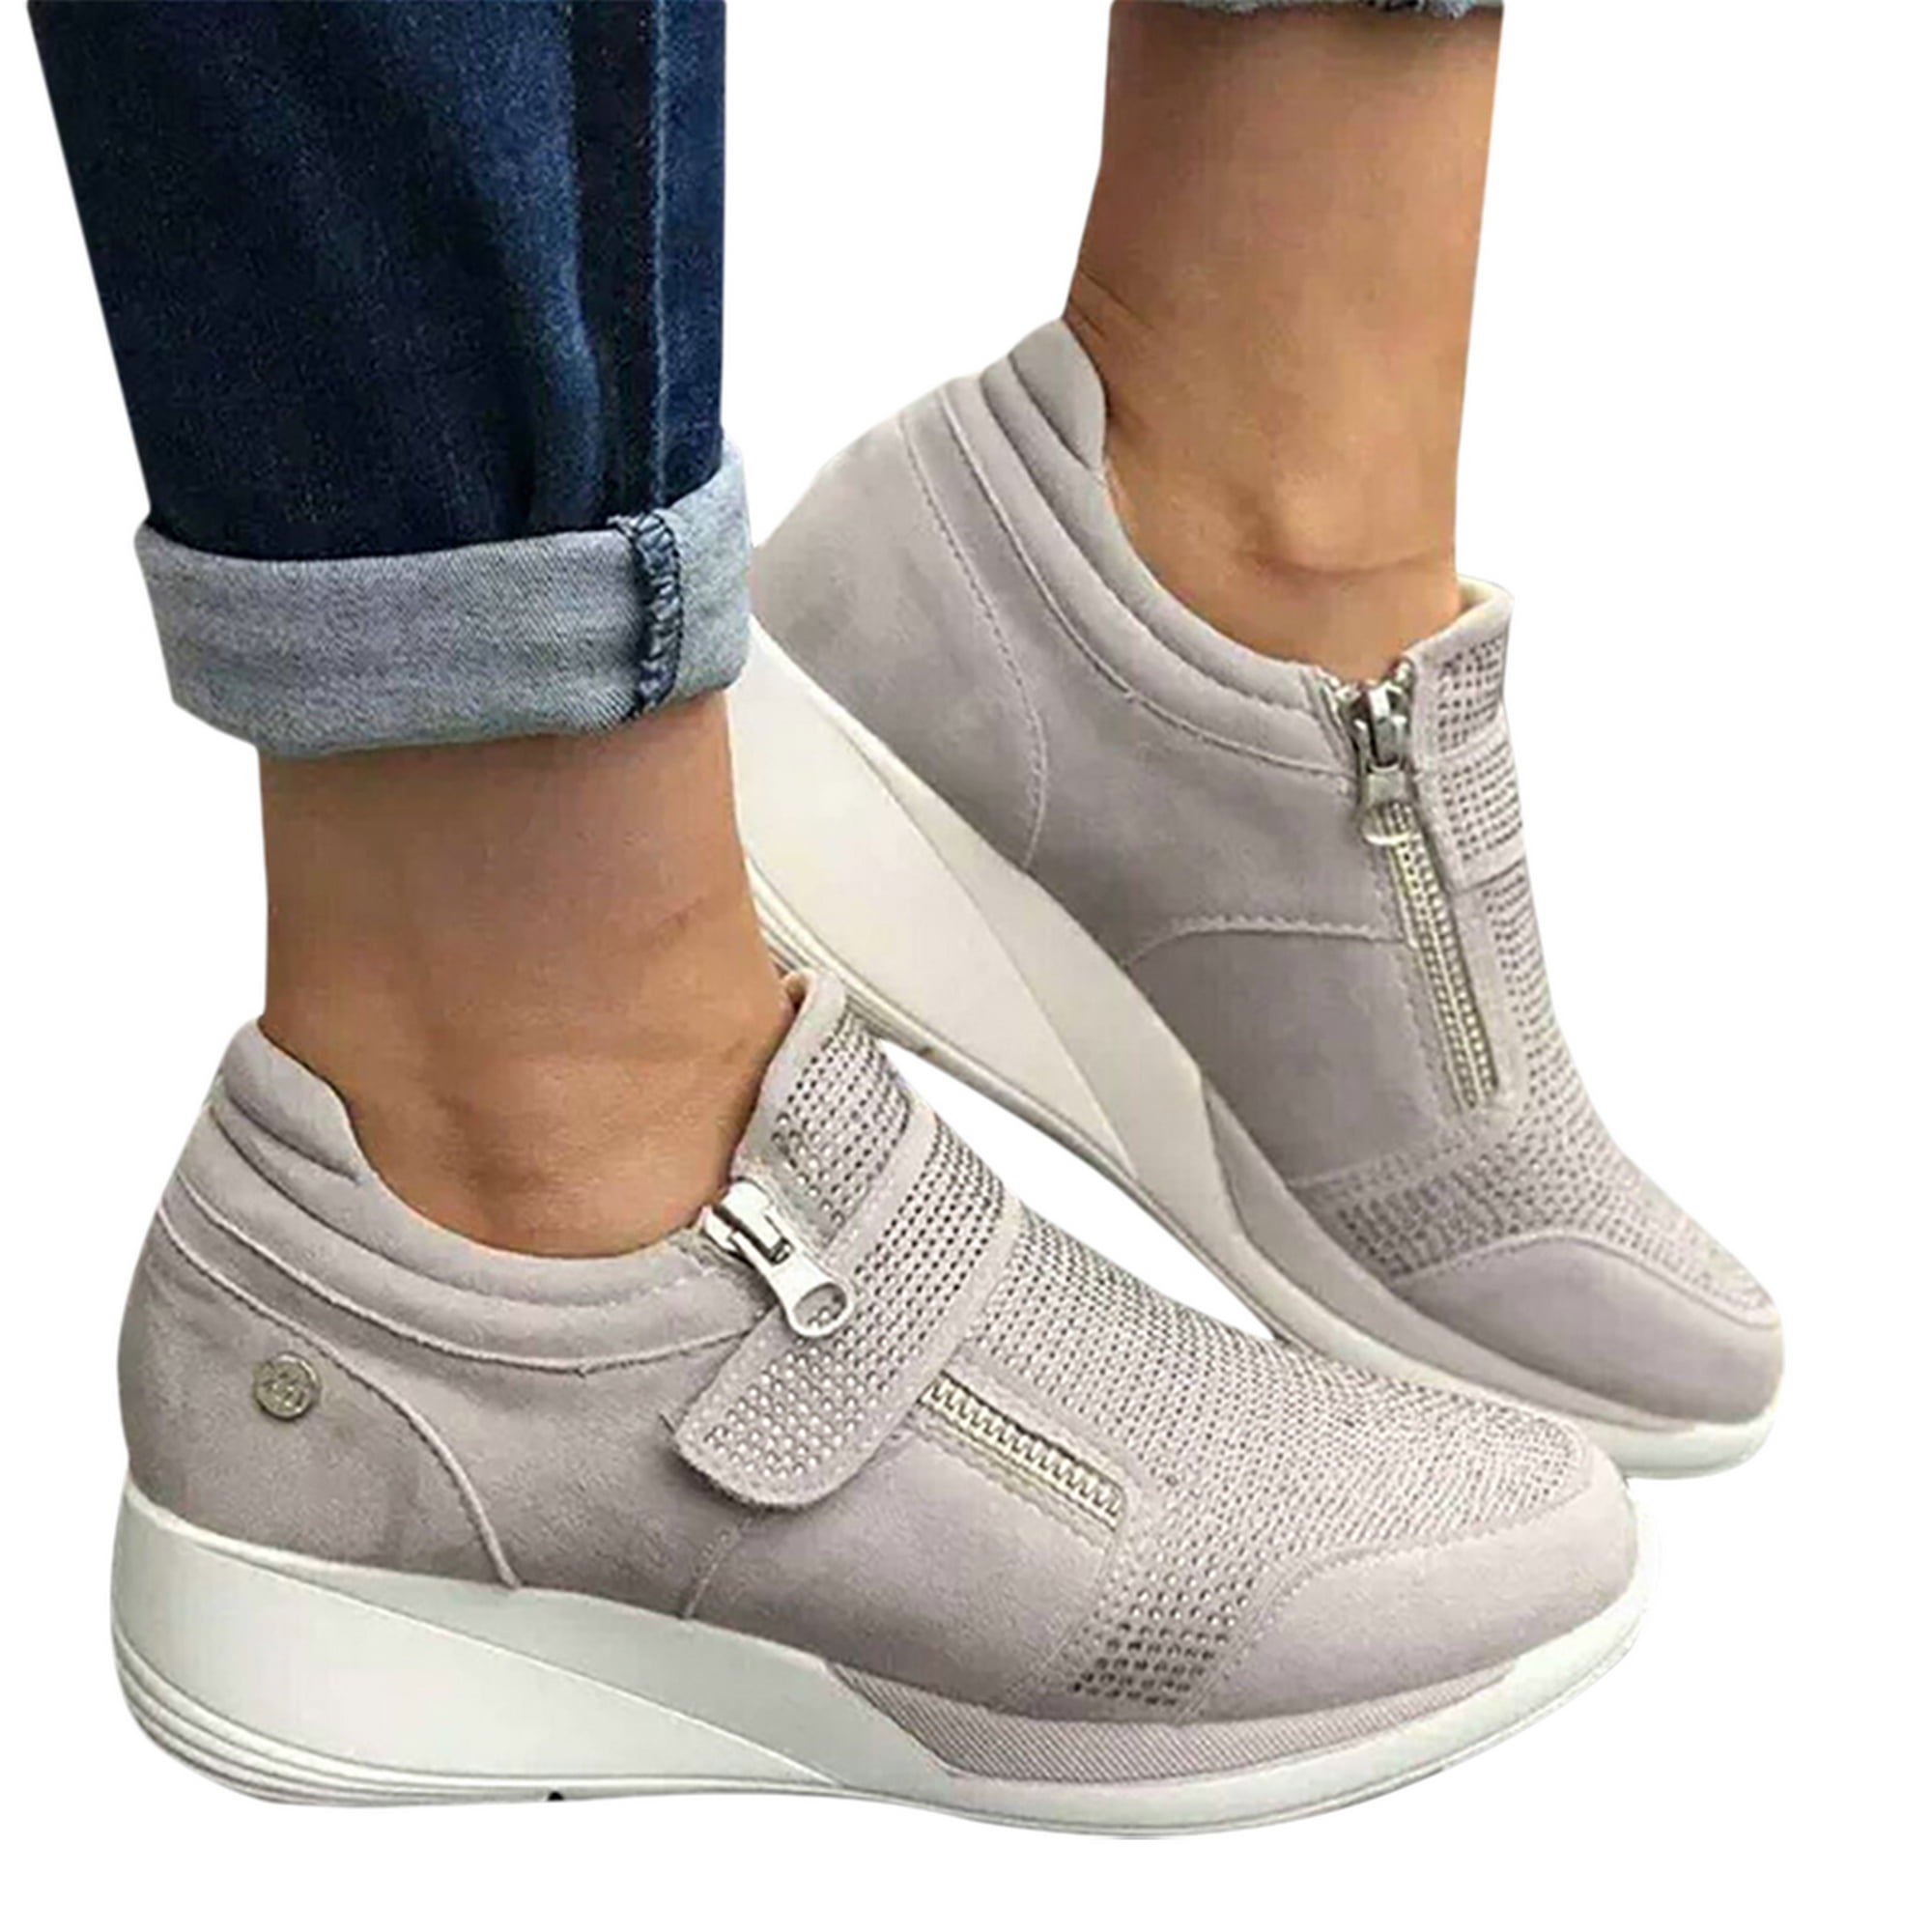 Women Mesh Jogging Walking Breathable Wedge Sneakers Creeper Shoes Lace Up Size